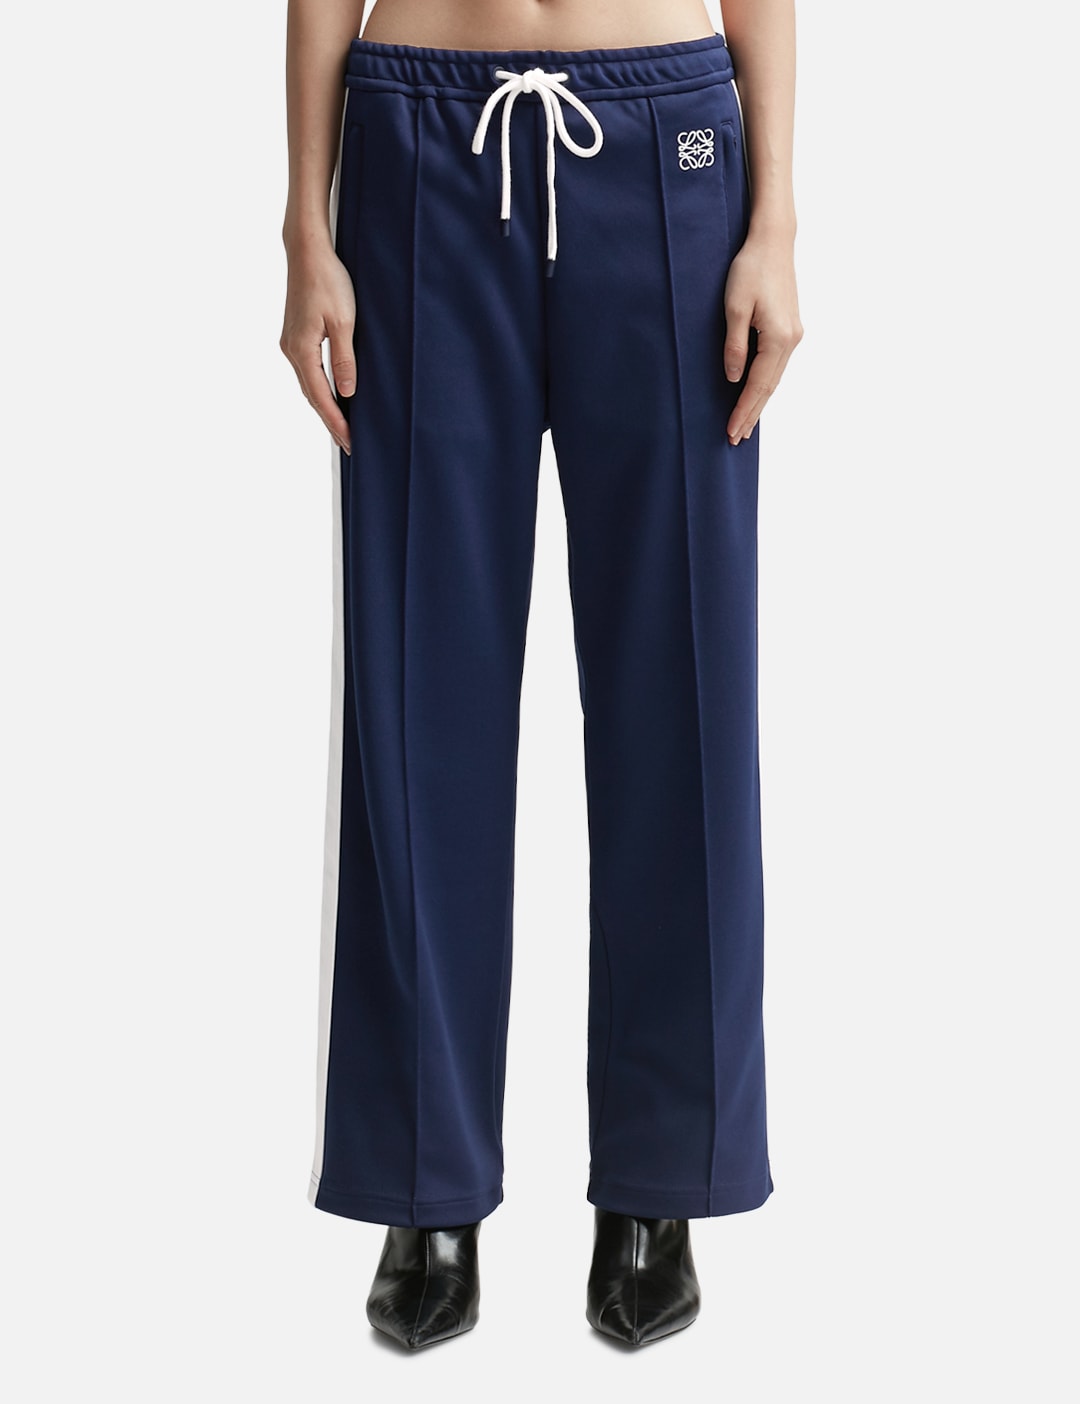 Loewe - Tracksuit Trousers | HBX - Globally Curated Fashion and ...